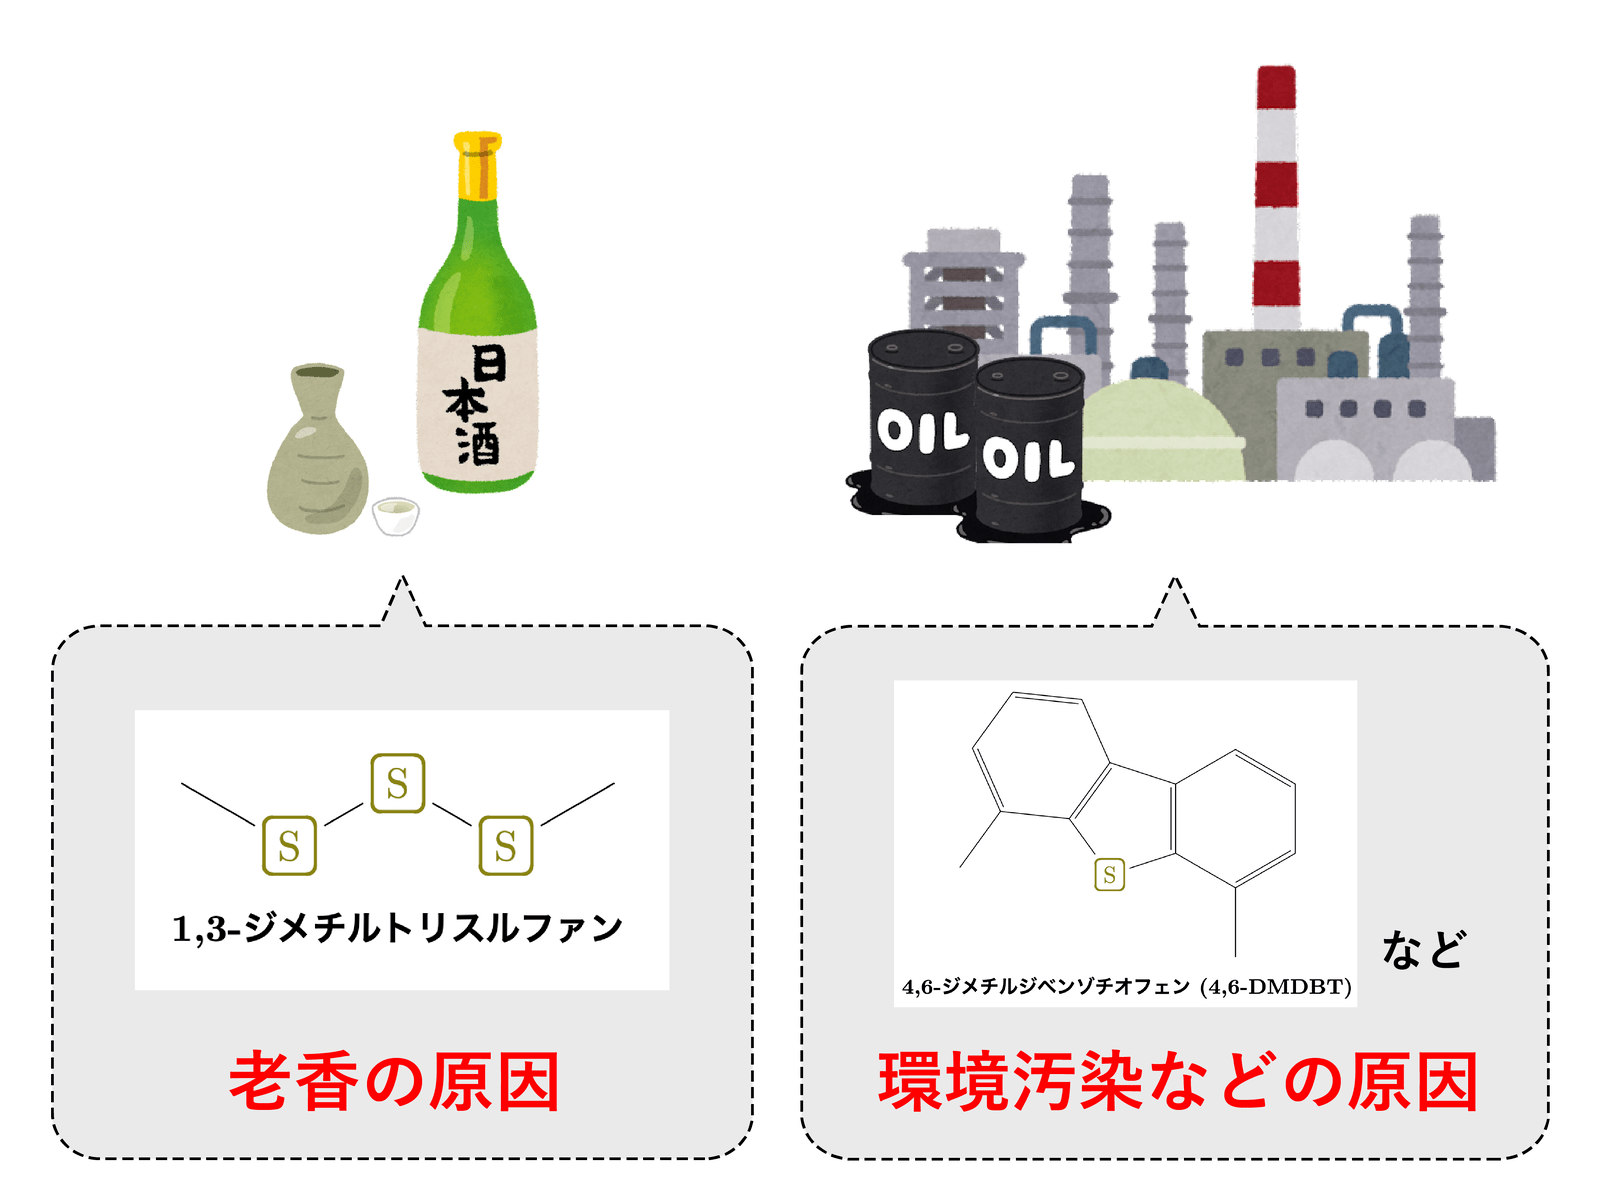 <dfn class="fig">図1</dfn>：<span class="qrinews-figure-title">悪さをする有機硫黄化合物たち</span>　図の一部は、<a href="https://www.irasutoya.com" class="link-to-external-page" target="_blank"><cite class="article" lang="ja">いらすとや</cite></a>より引用。